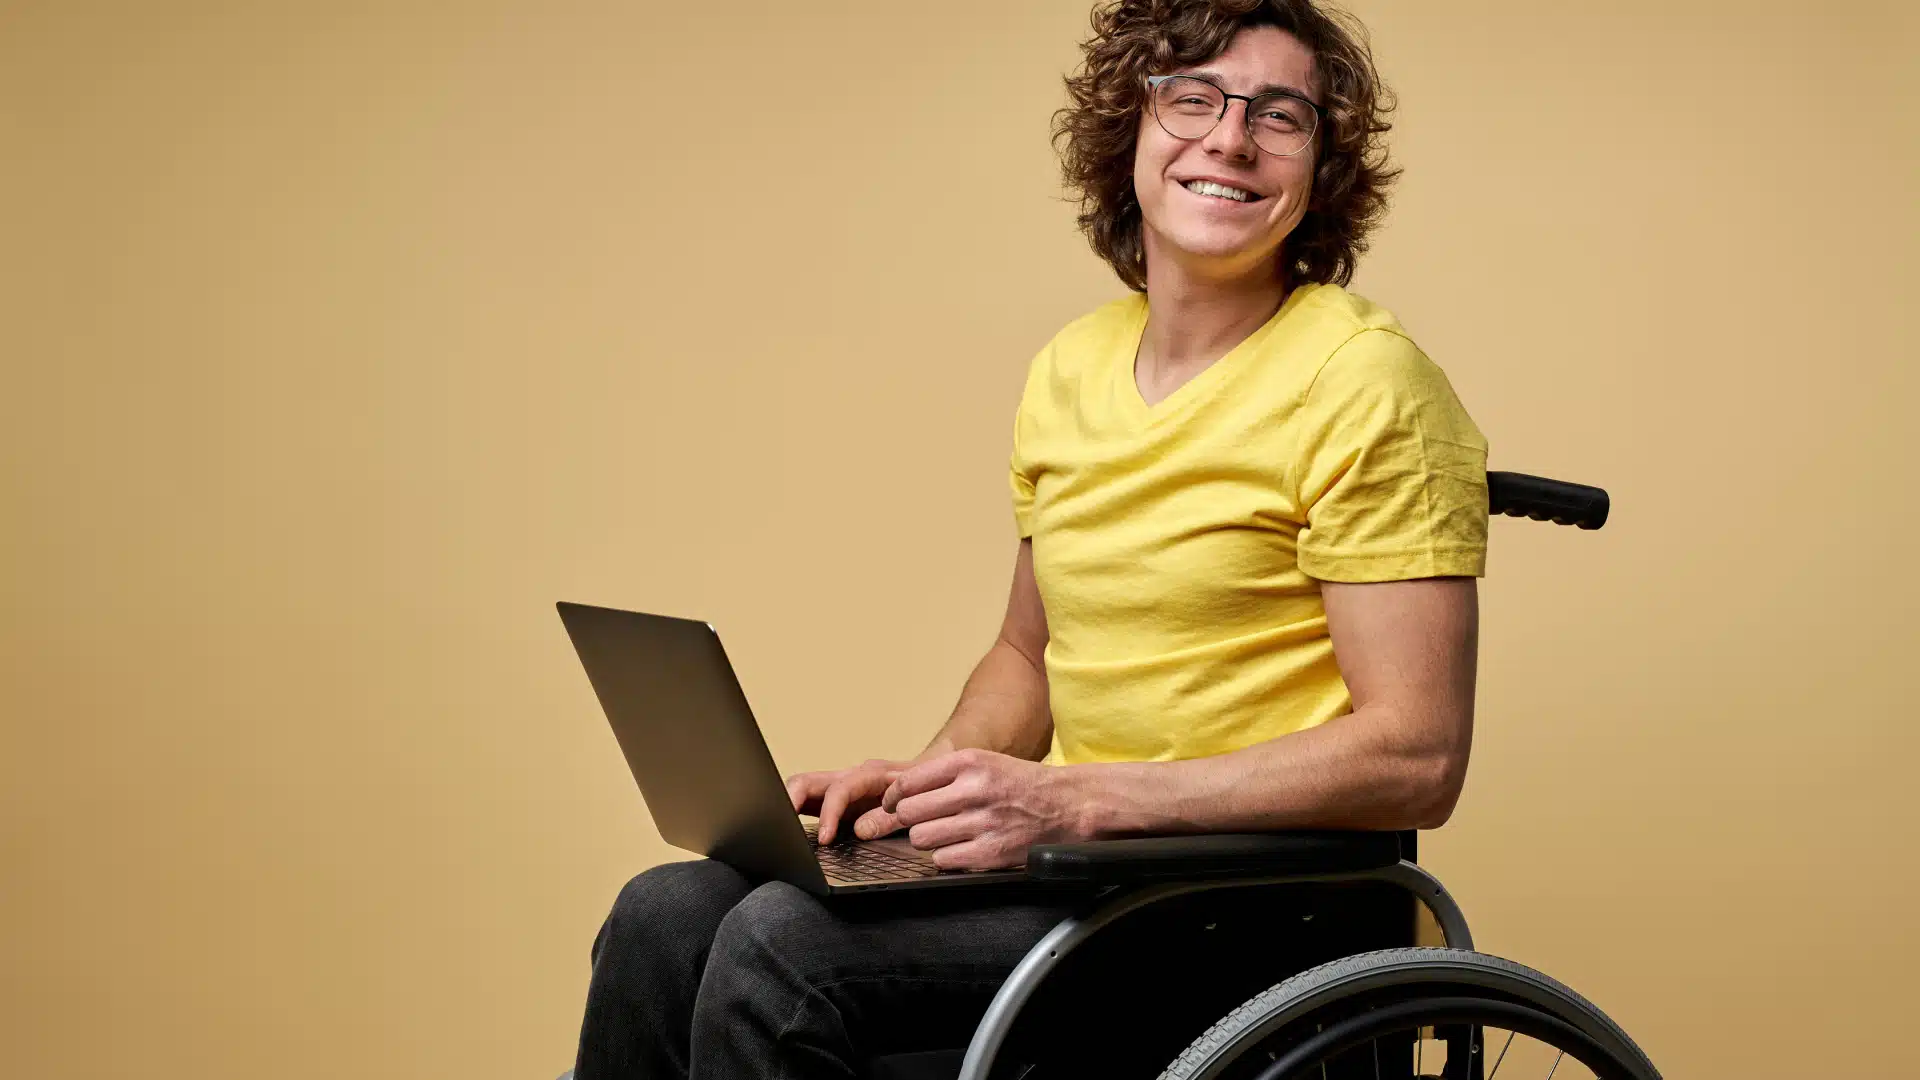 A man sits in a wheelchair with a laptop in his lap. He's turned towards the camera and smiling.